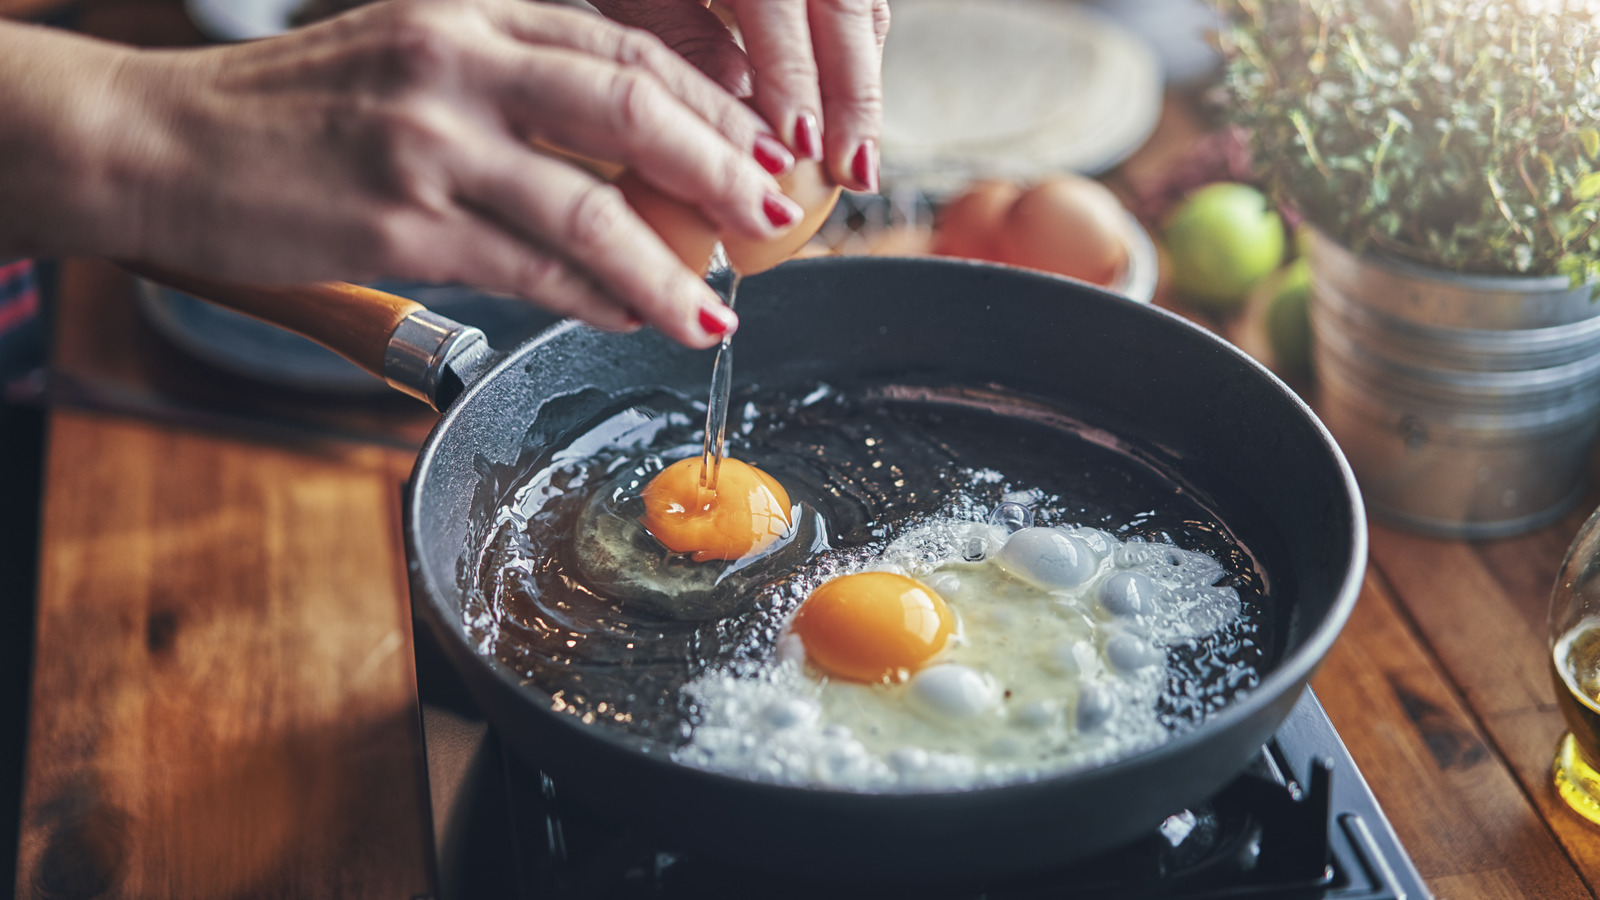 https://www.tastingtable.com/img/gallery/the-only-type-of-spatula-you-should-use-to-flip-fried-eggs/l-intro-1685751332.jpg